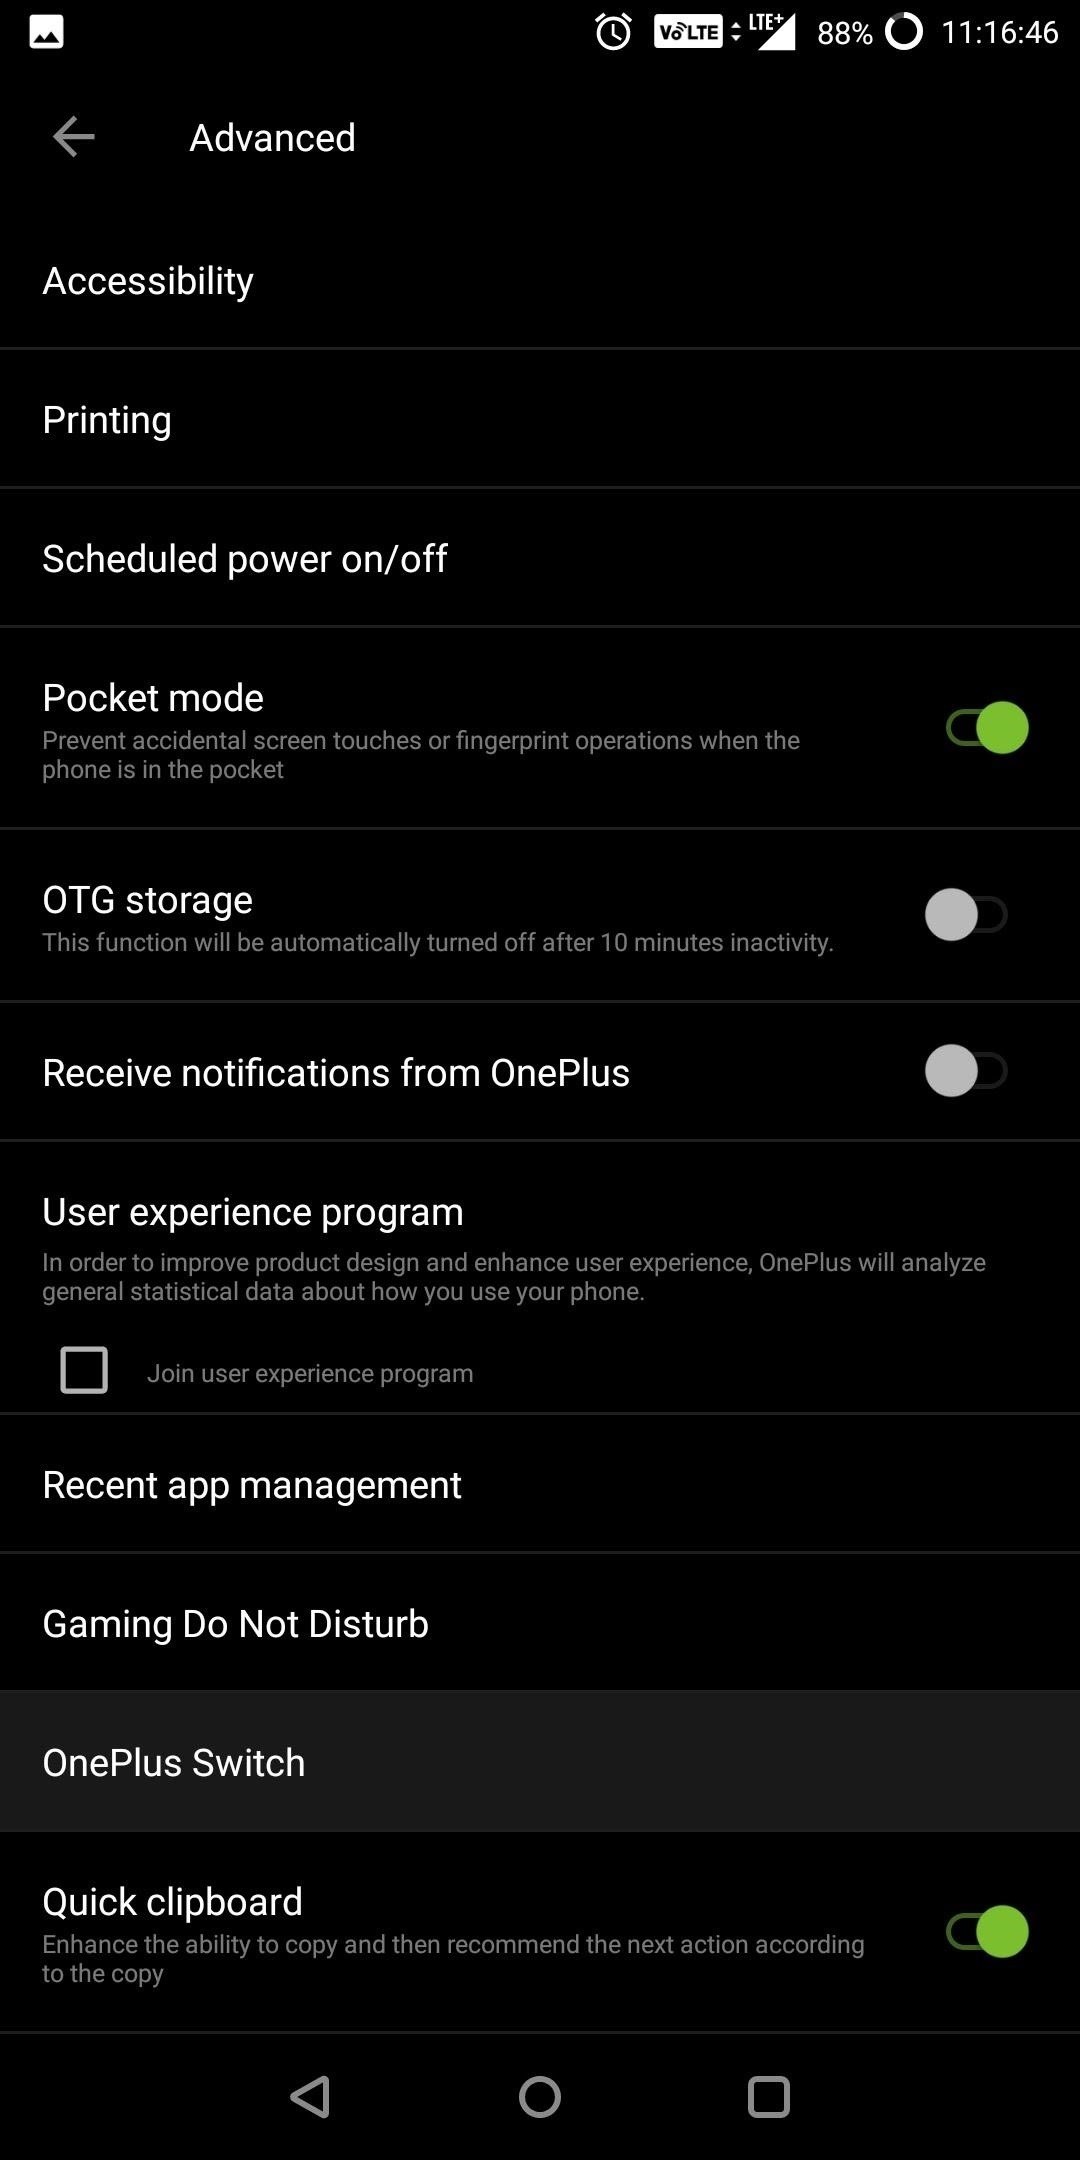 4 Cool New Features in Oreo Beta 2 for the OnePlus 5T